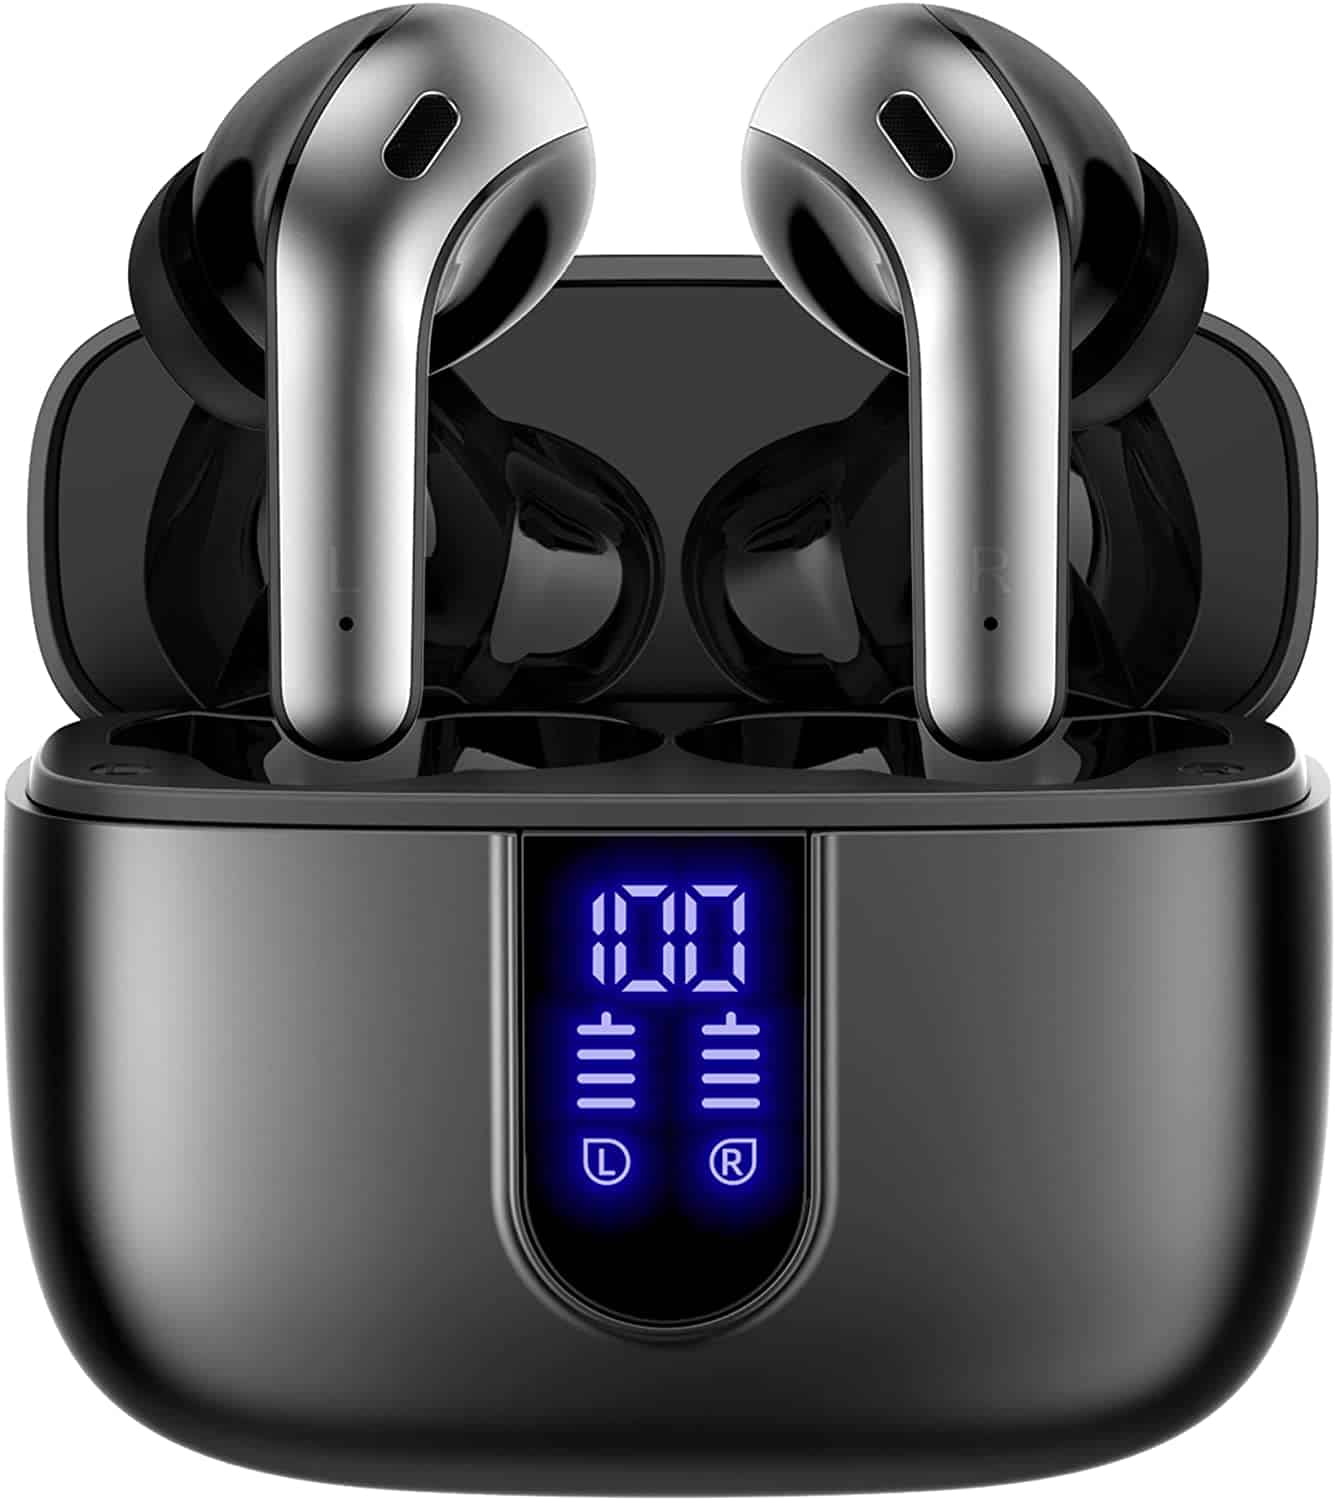 TAGRY X08 Bluetooth Wireless Earphones: Save Up to 41% Today!